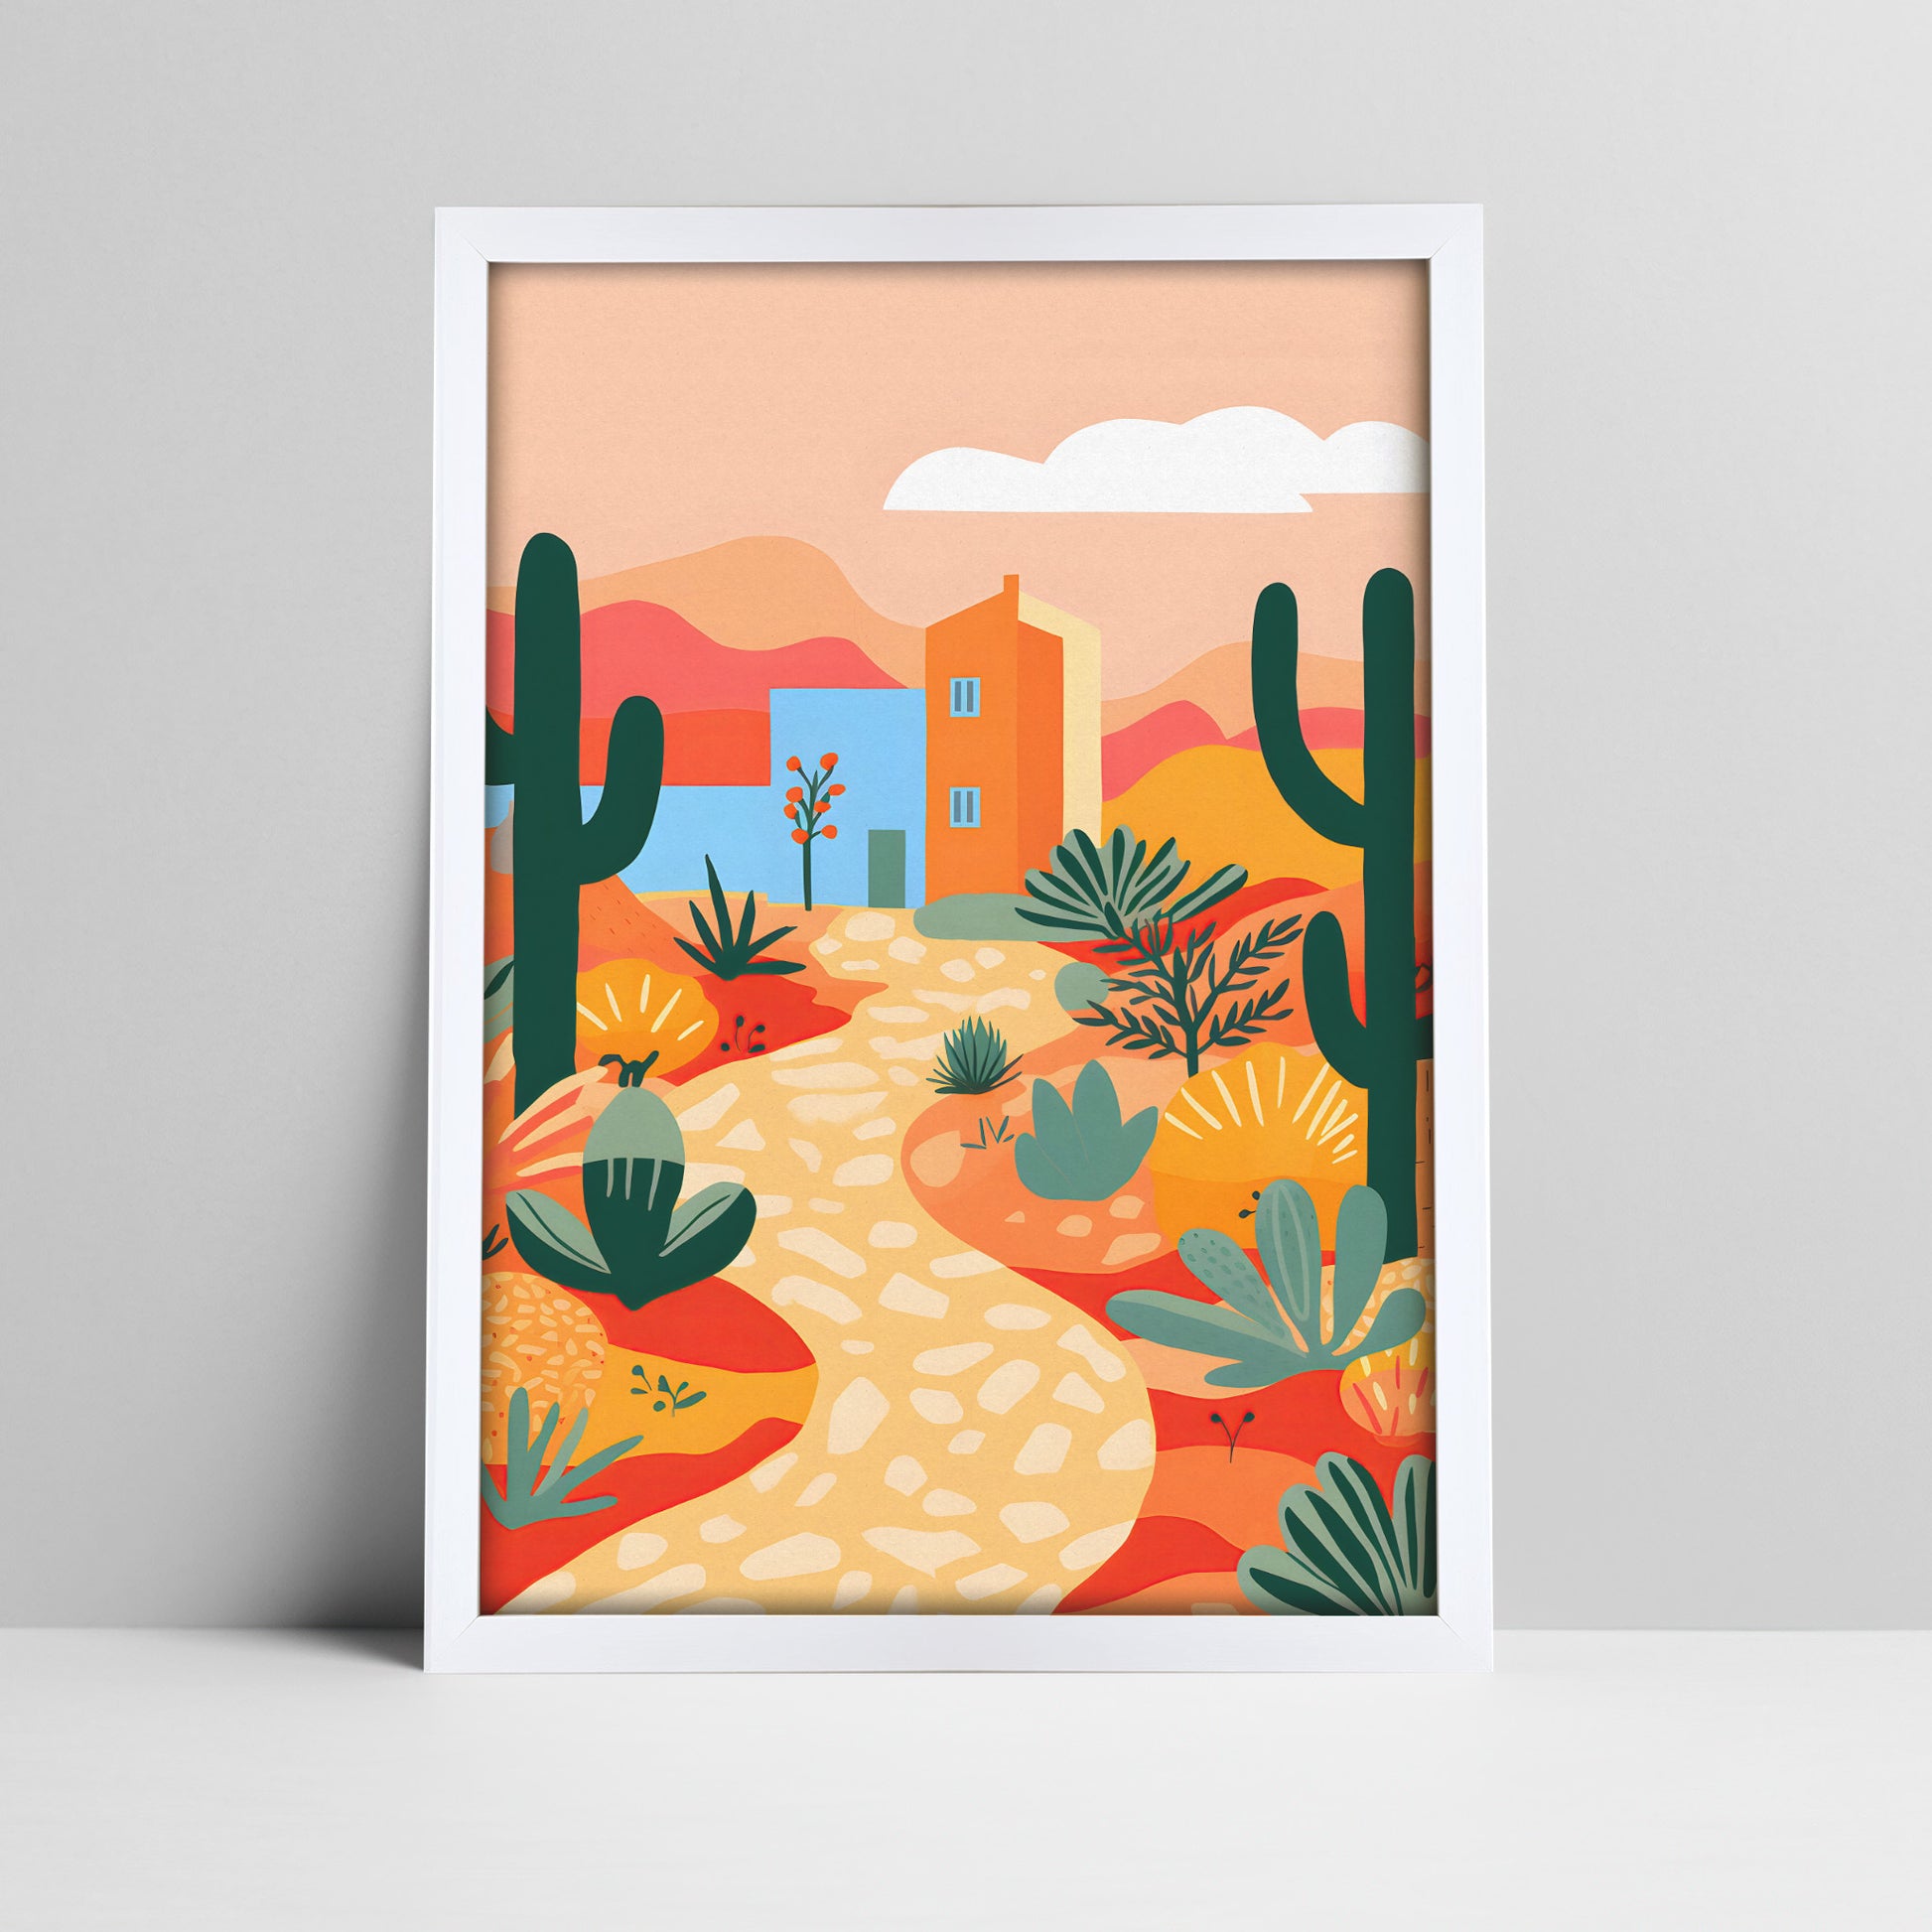 Art print of desert landscape illustration with cacti and house in a white frame